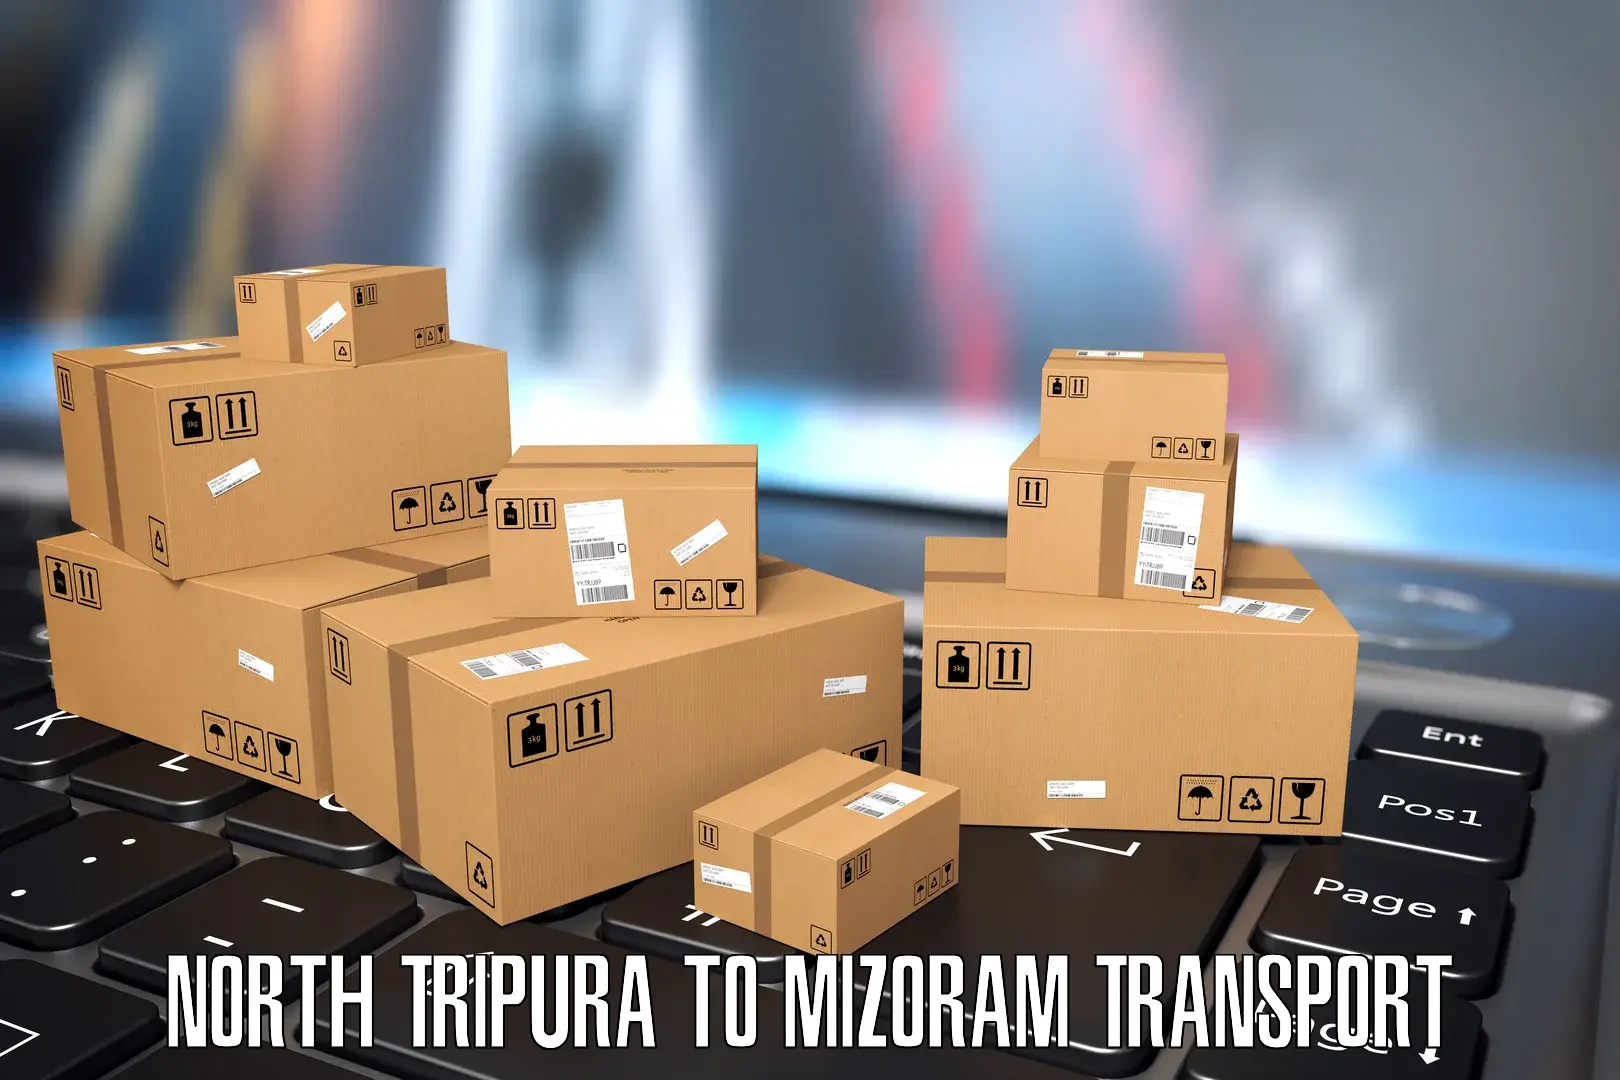 Two wheeler parcel service North Tripura to Darlawn